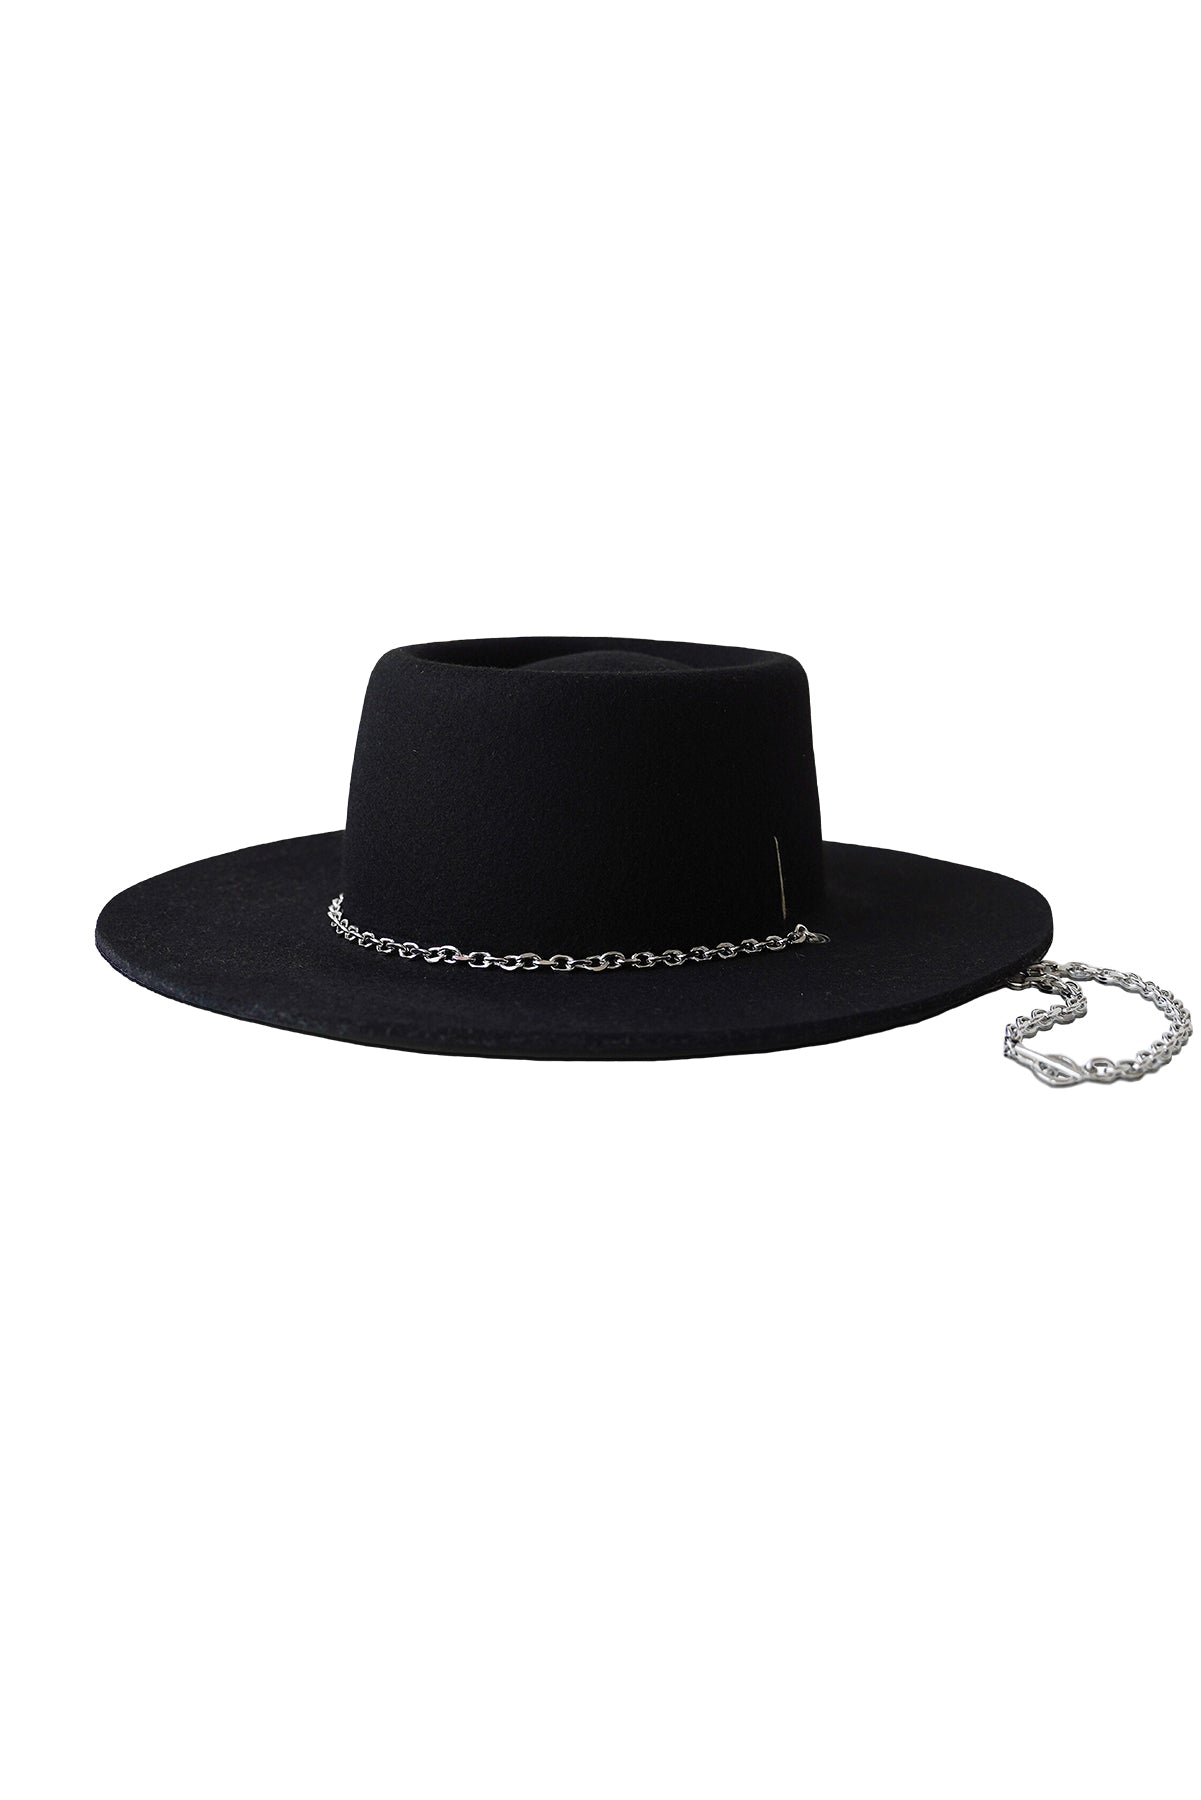 Unisex black bolero wool felt hat with a wide flat brim, telescope crown, and detachable silver chain detail. Handcrafted by SoonNoon in Stockholm